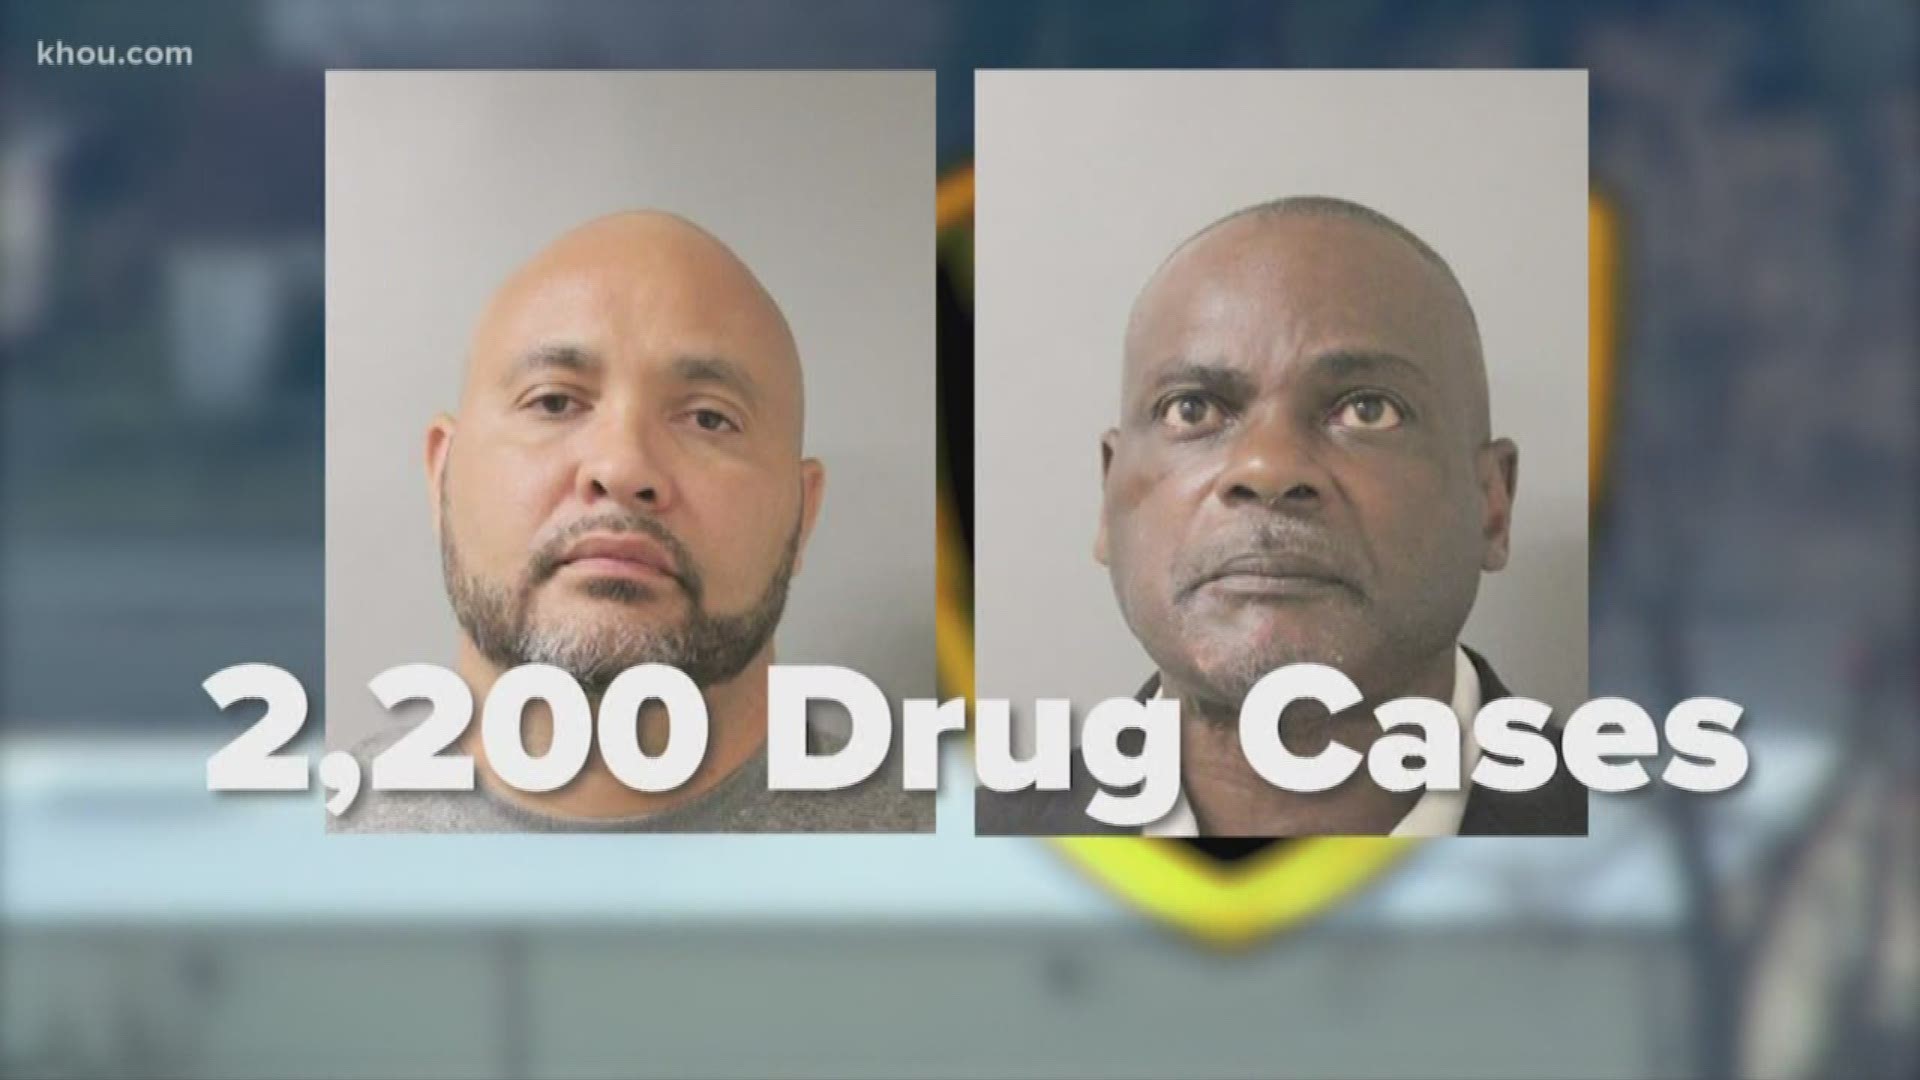 Prosecutors are now pouring over 14,000 cases related to the former HPD officers charged in the Harding Street raid.